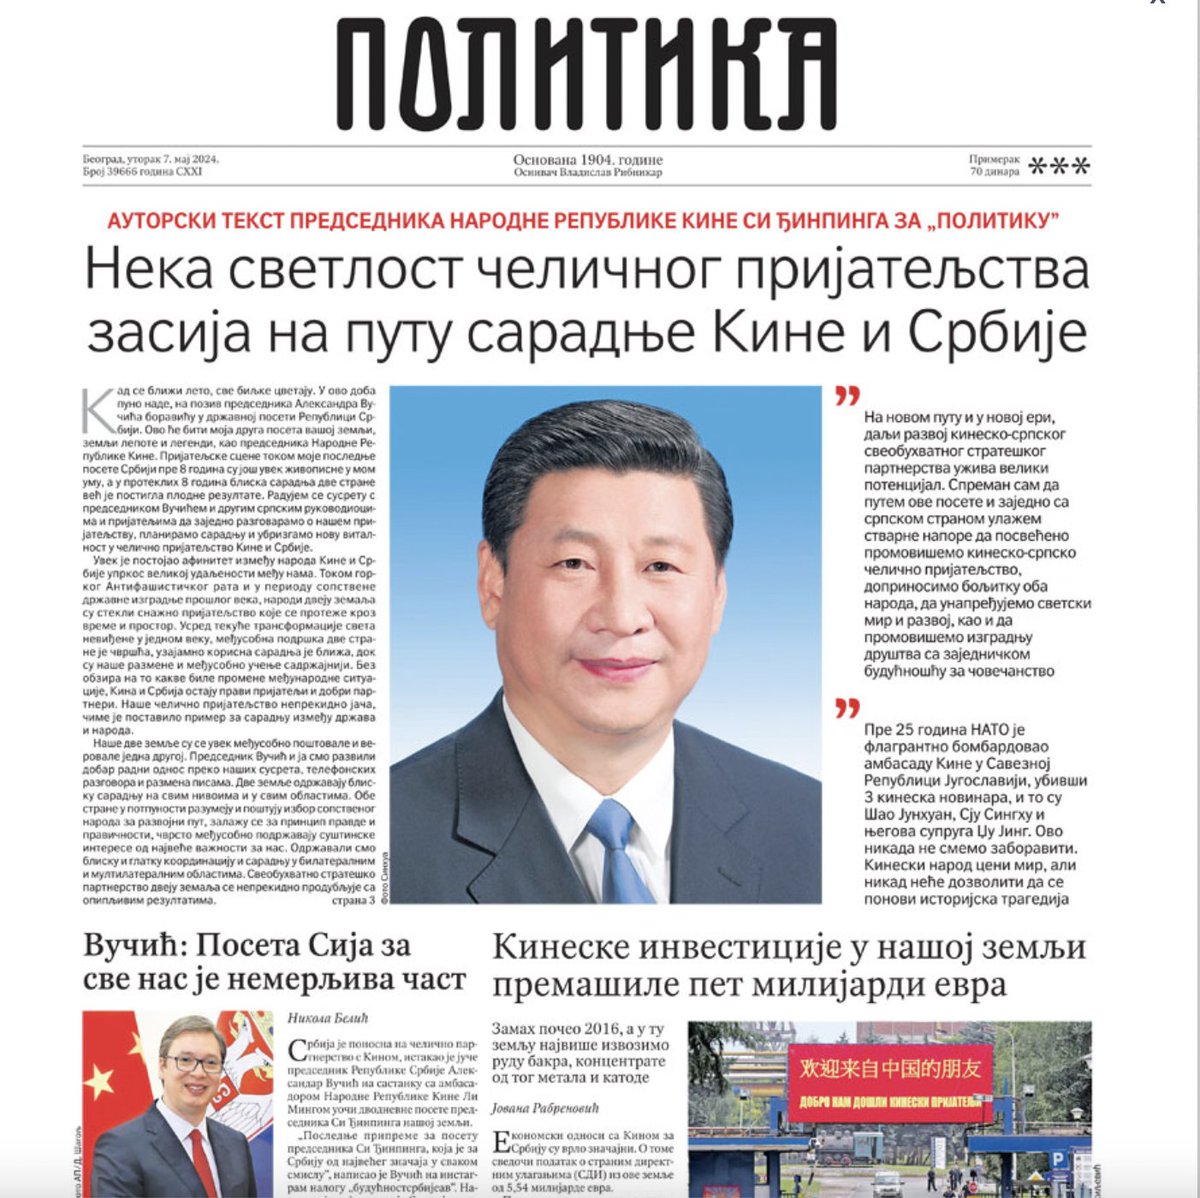 'May the Light of Our Ironclad Friendship Shine on the Path of China-Serbia Cooperation' blares the headline in Serbia's pro-government daily ahead of Xi Jinping's arrival tonight. For a moment there I felt like I'd stepped into a time machine to a communist era...